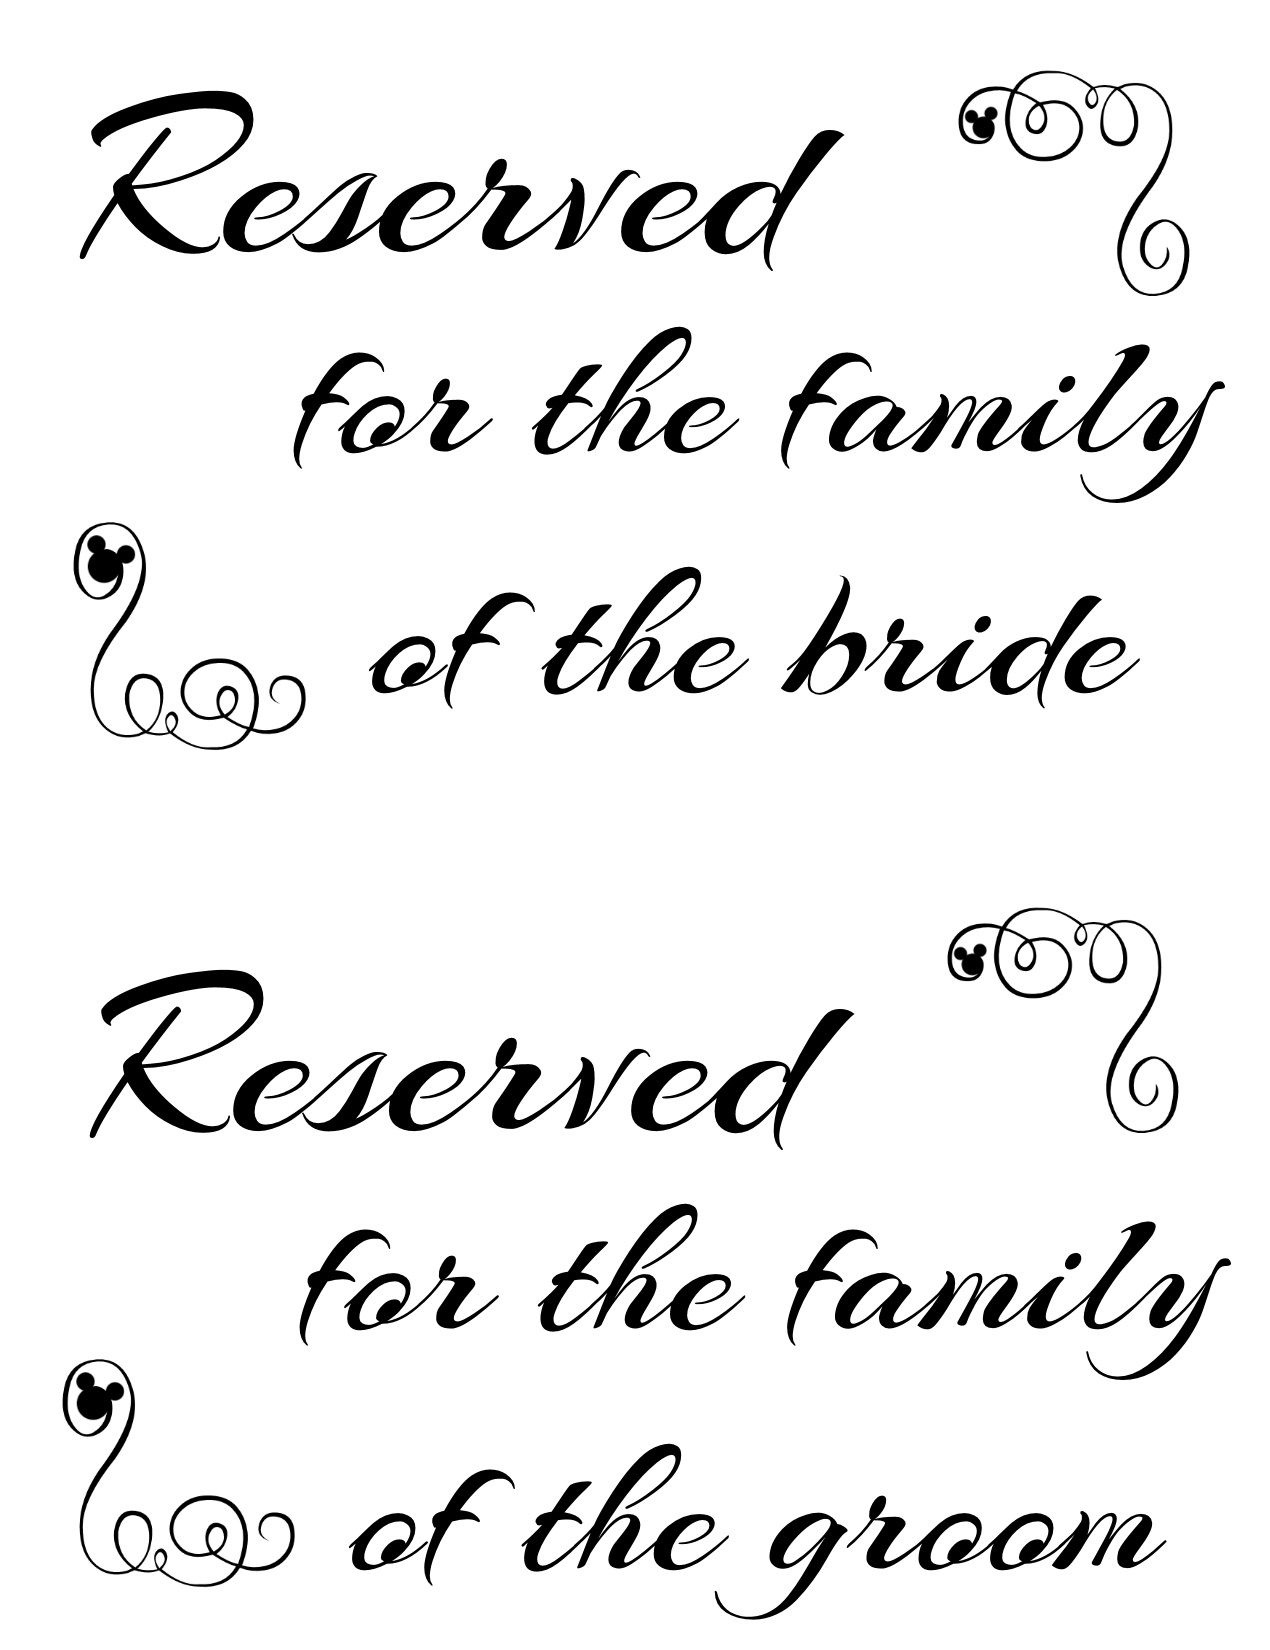 Free Printable Reserved Seating Signs For Your Wedding Ceremony - Free Printable Reserved Table Signs